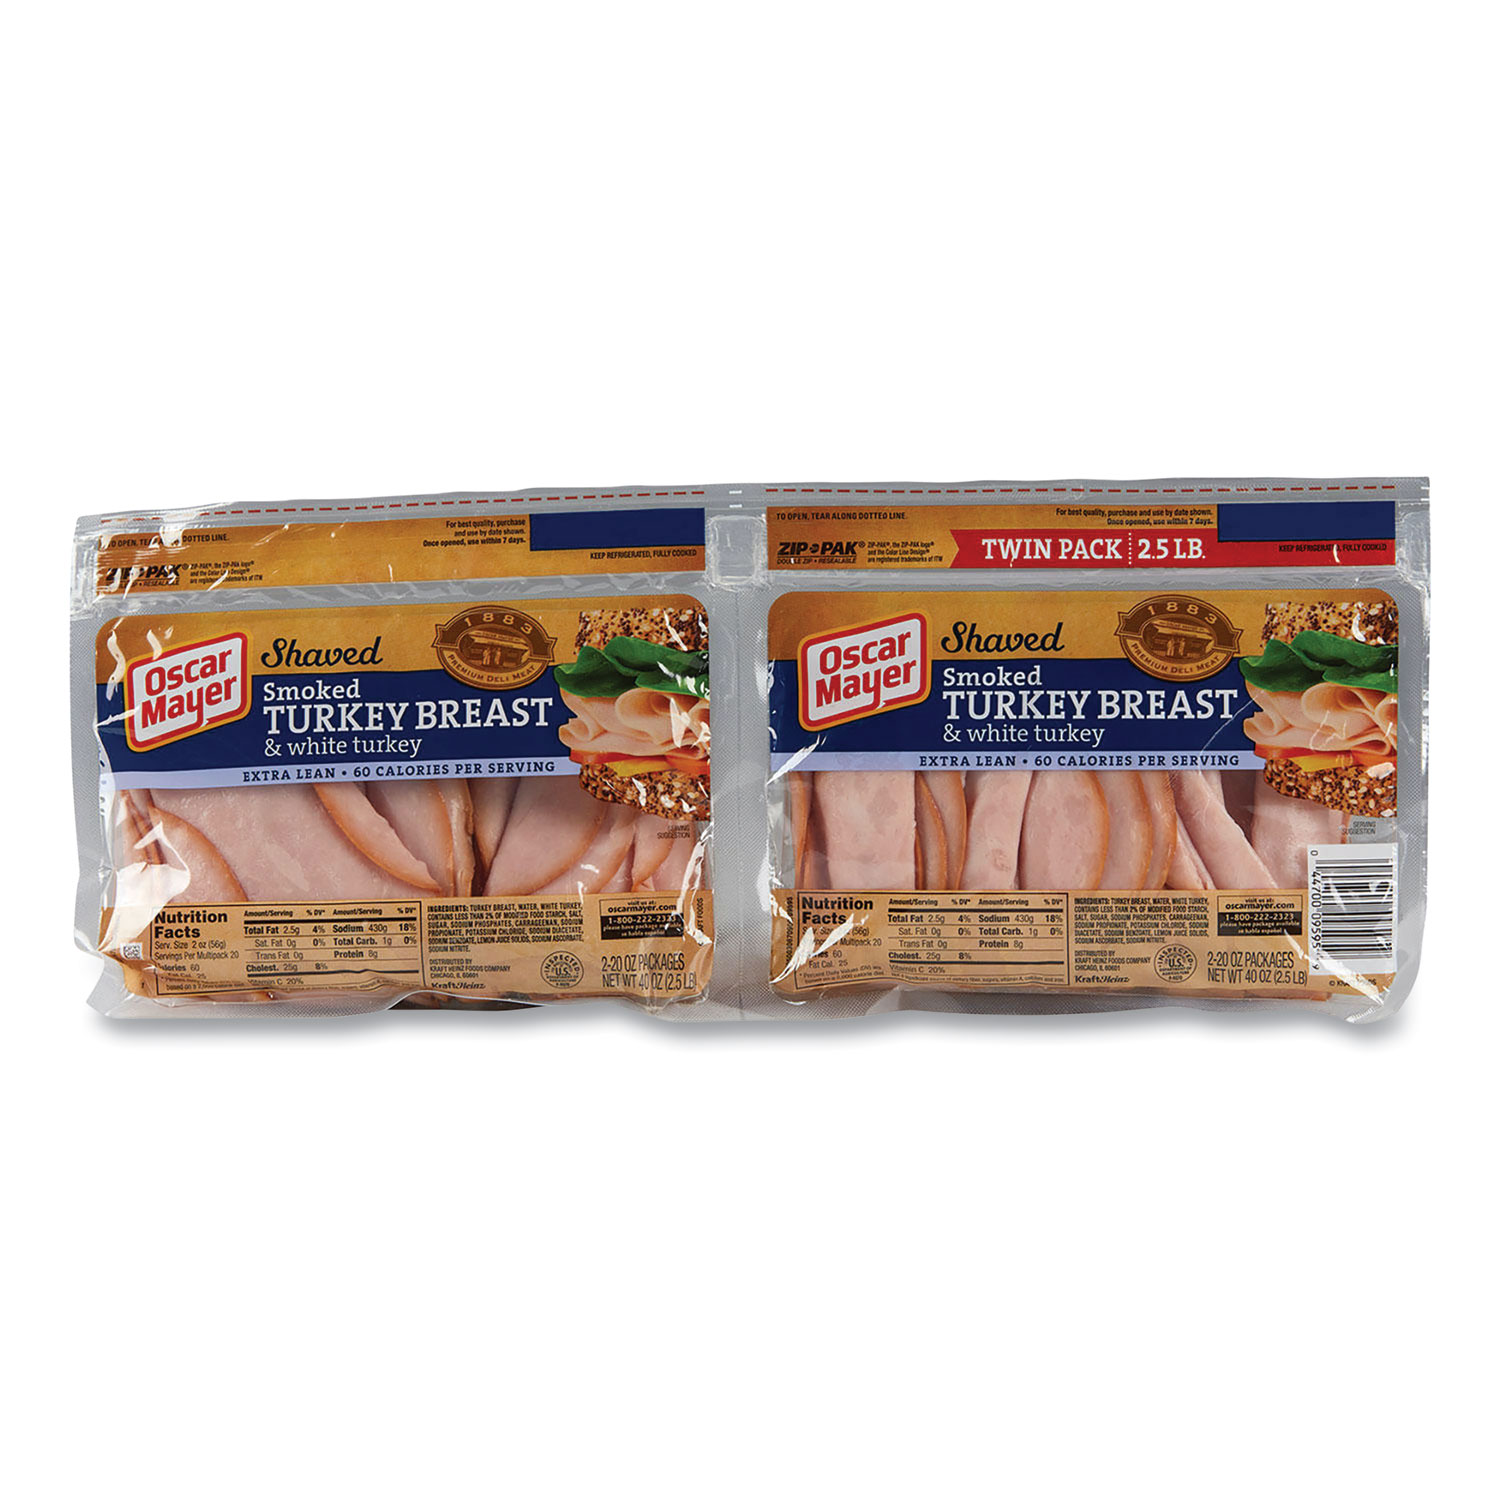  Oscar Mayer 09595 Shaved Smoked Turkey Breast and White Turkey, 20 oz Bag, 2/Pack, Free Delivery in 1-4 Business Days (GRR90200479) 